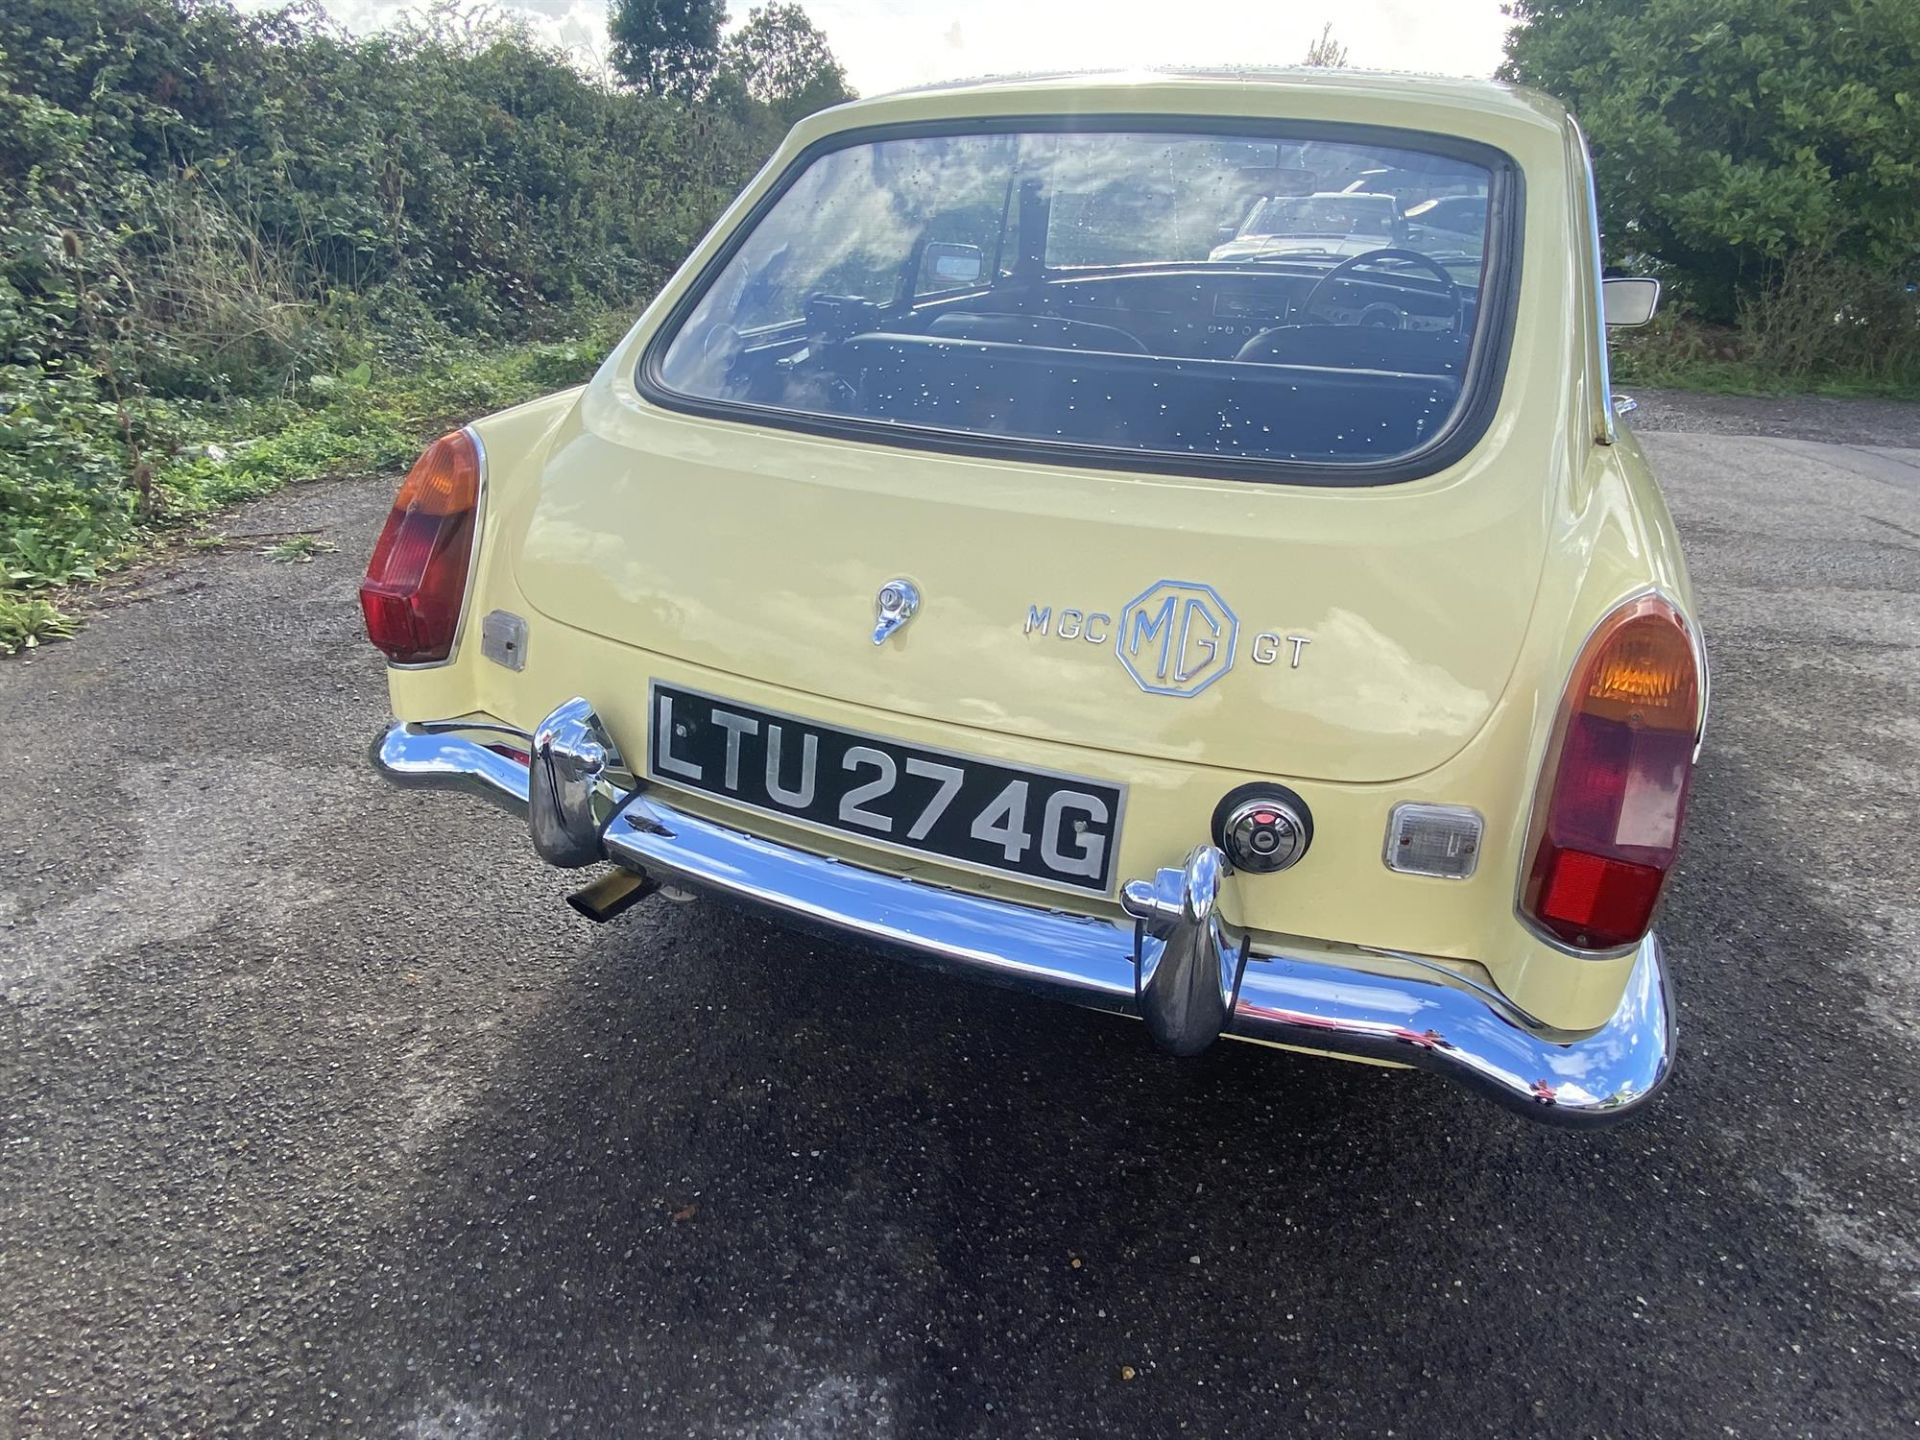 1969 MGC GT. Registration number: LTU 274G - Finished in Primrose yellow, with full black leather - Image 15 of 22